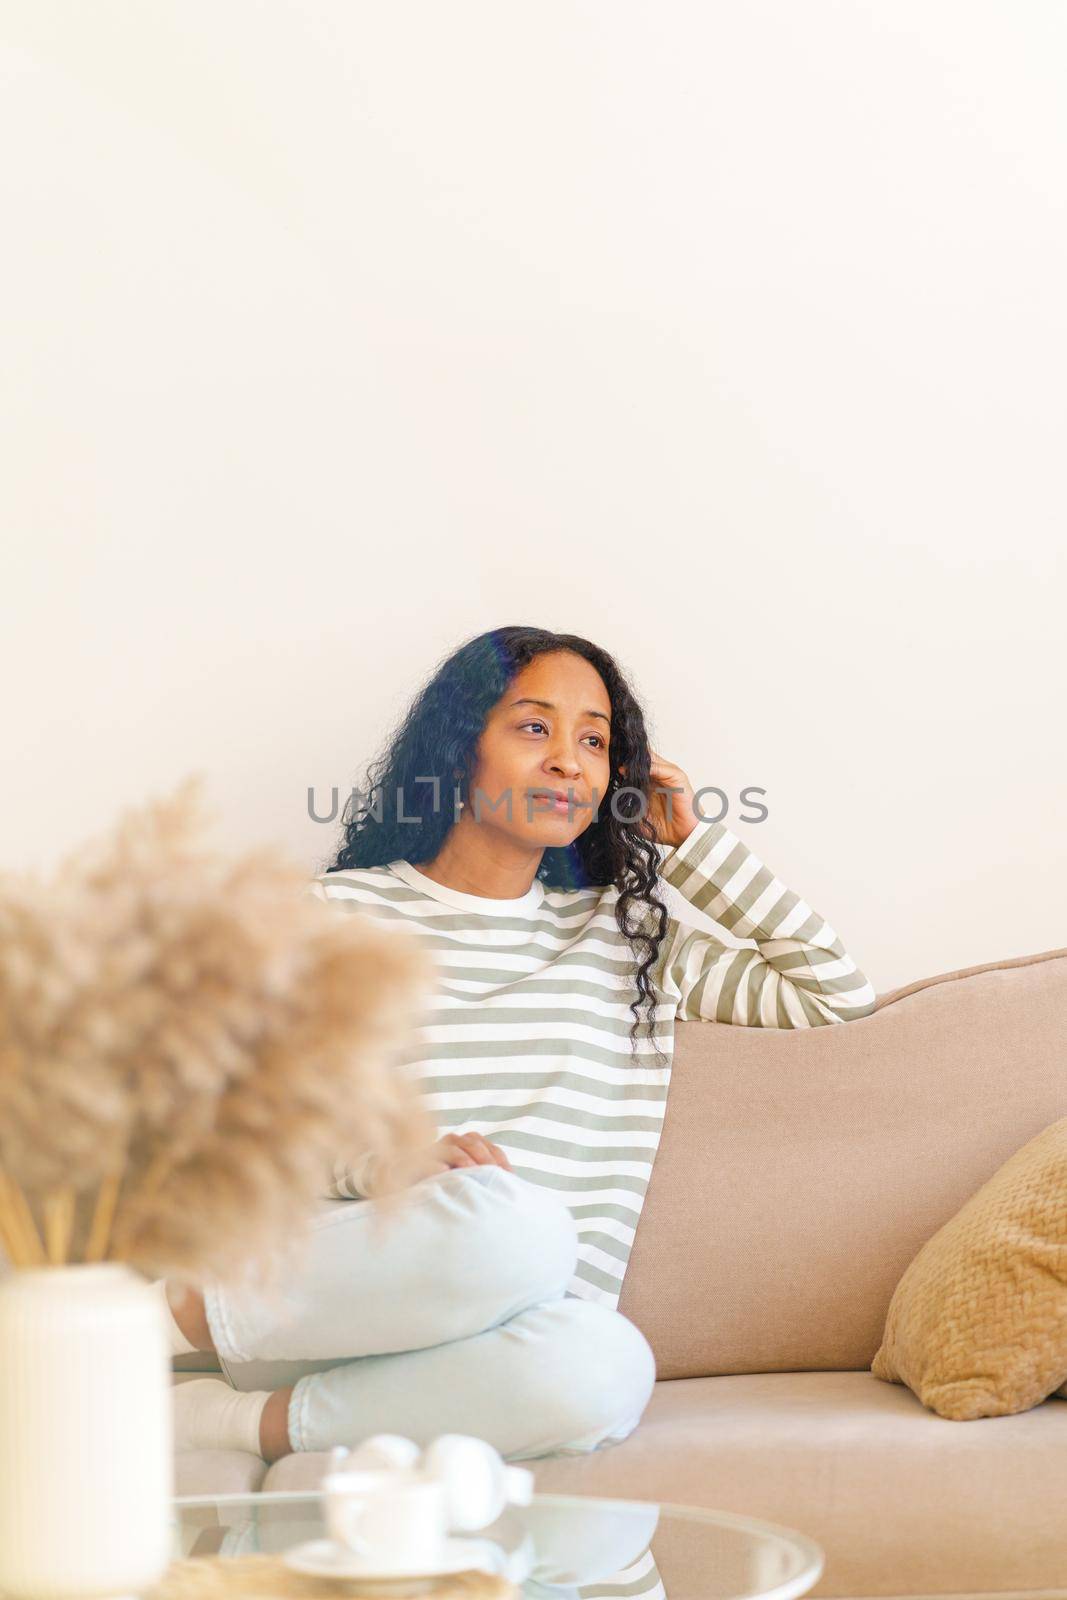 Dreaming and smiling African-American female sitting on sofa in lounge. Showing positive emotion. Concept of enjoying life in moment. Daytime pleasure and comfort. Selective focus copyspace vertical